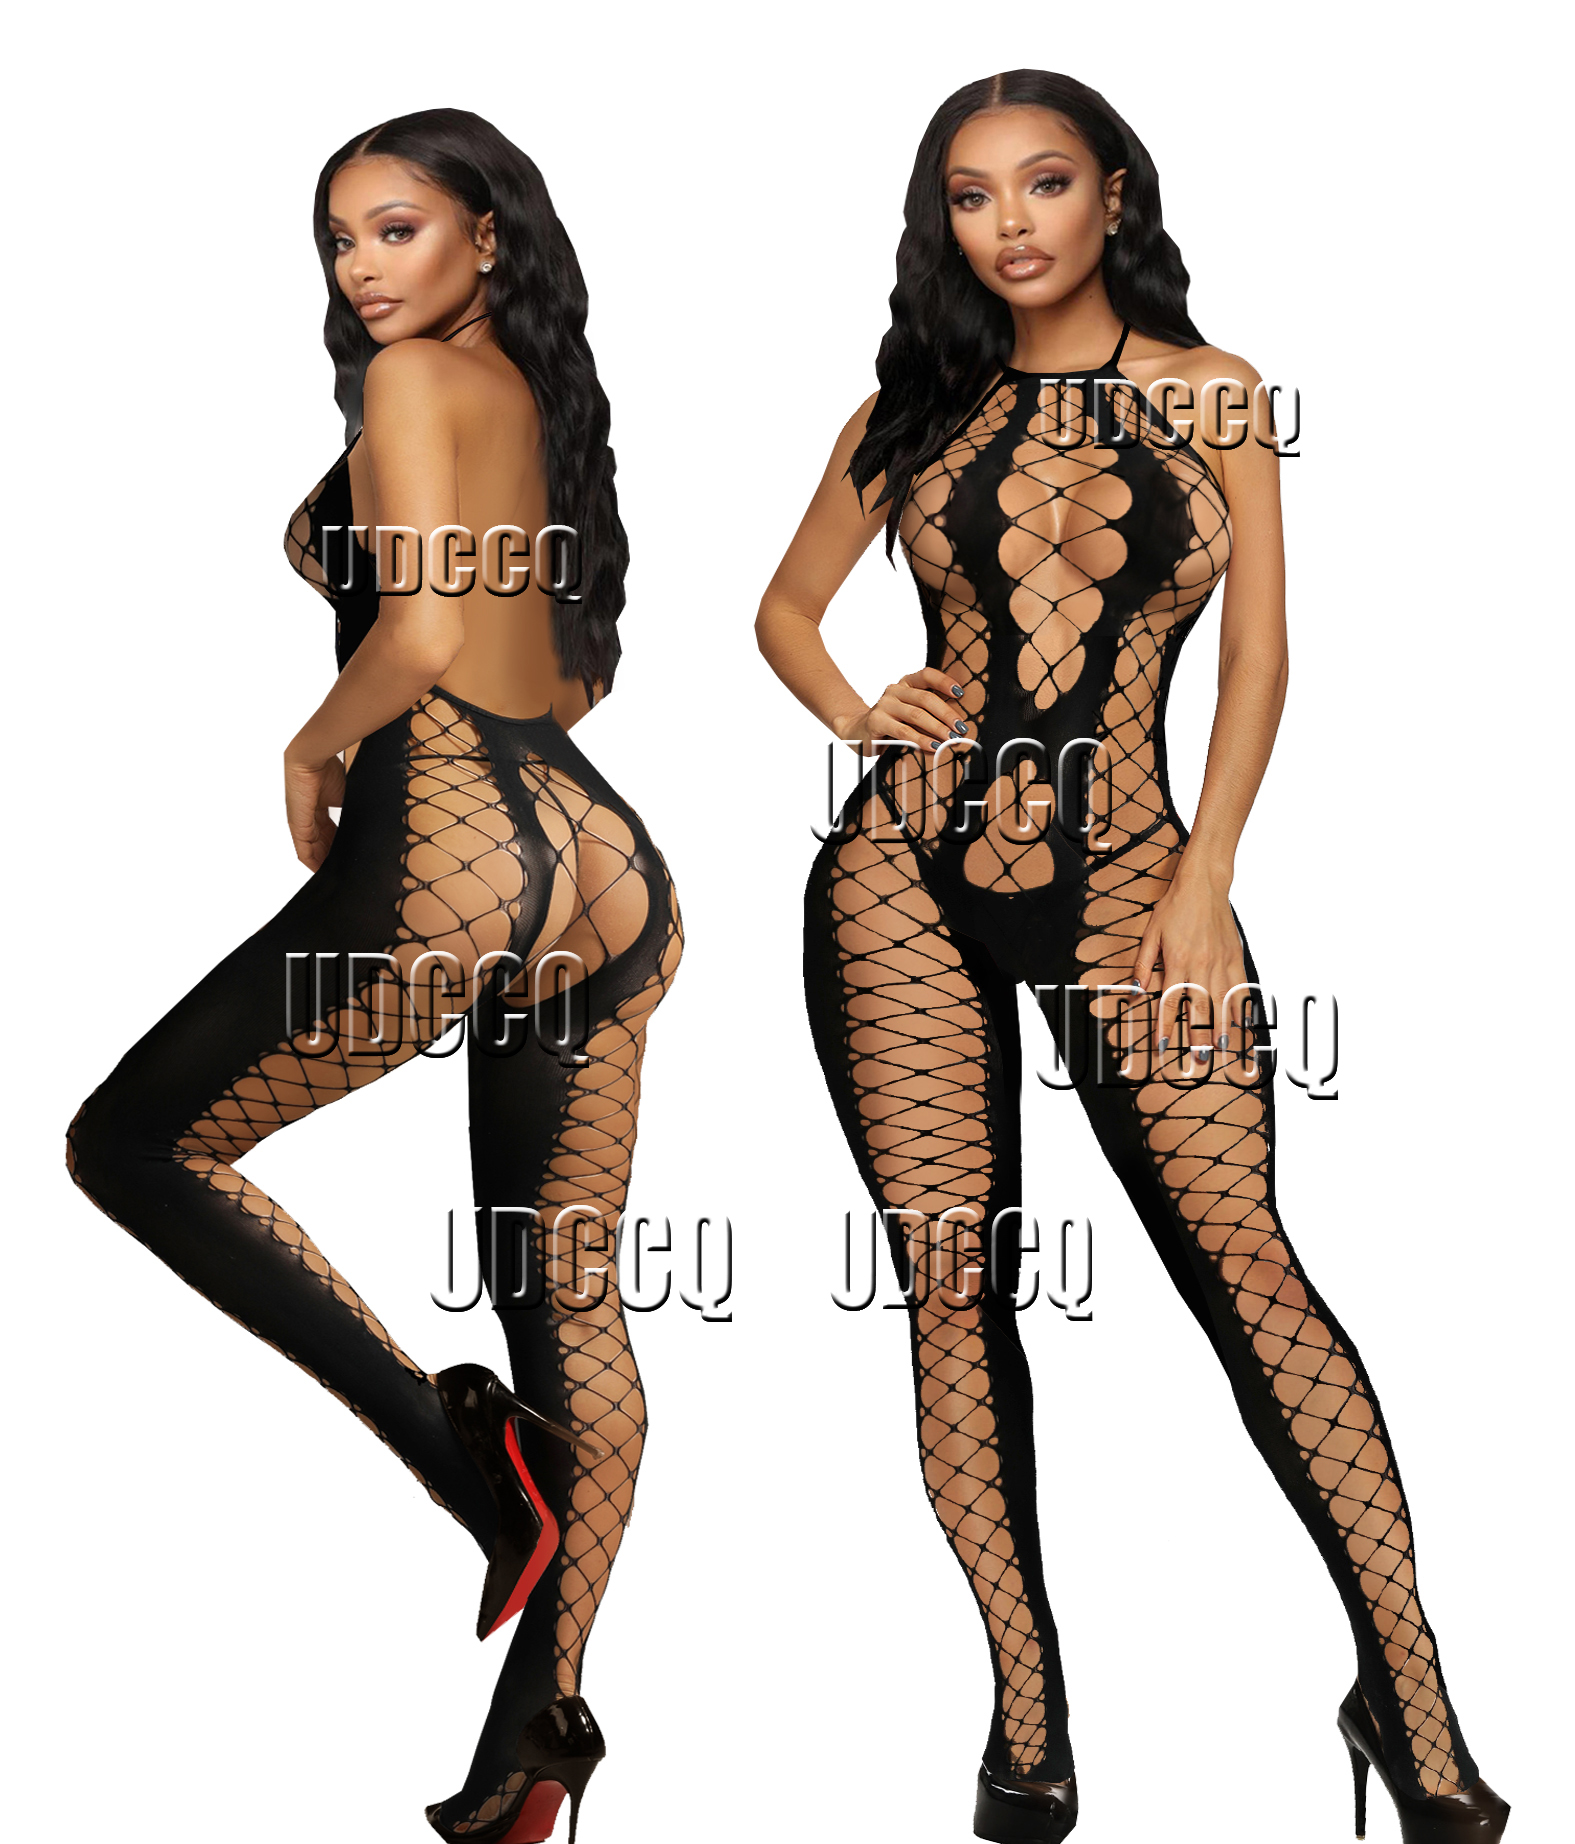 Erotic Hot Sex Products Sexy Costumes Underwear Slips Intimates Bodysocks catsuit sexy lingerie porno body suit plus size new